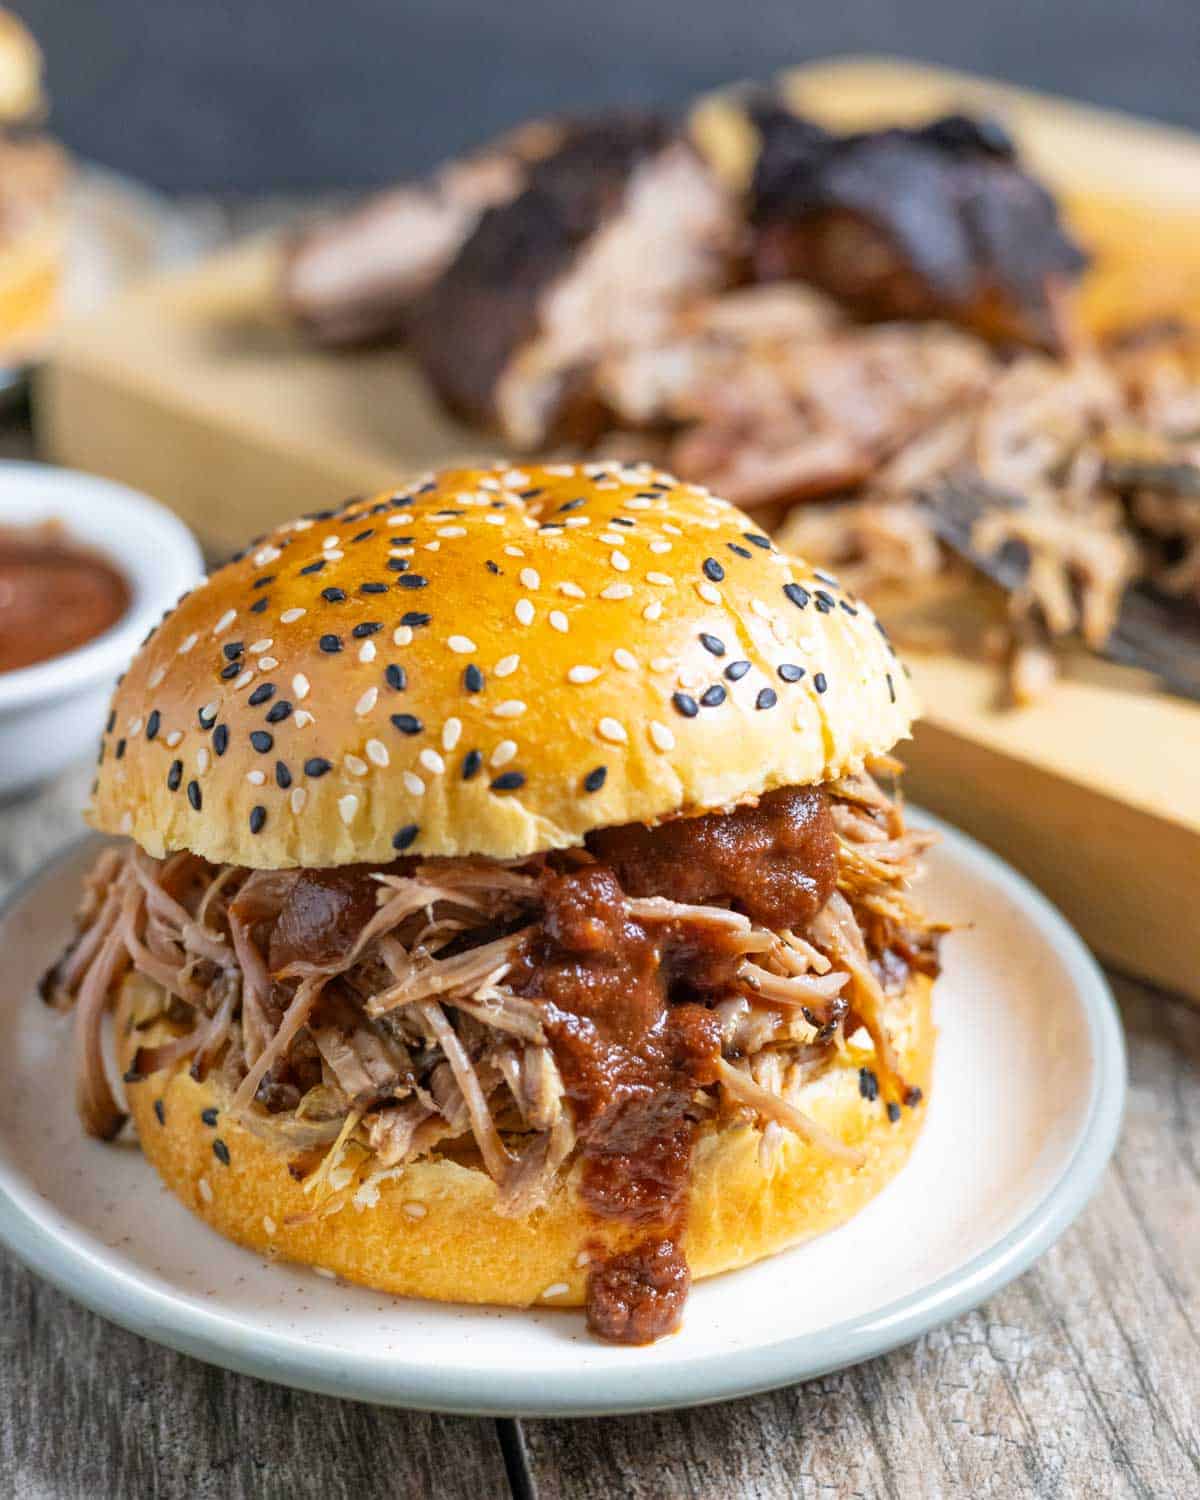 Crock pot pulled pork on a sesame seed bun with bbq sauce dripping over the pork and bottom bun.